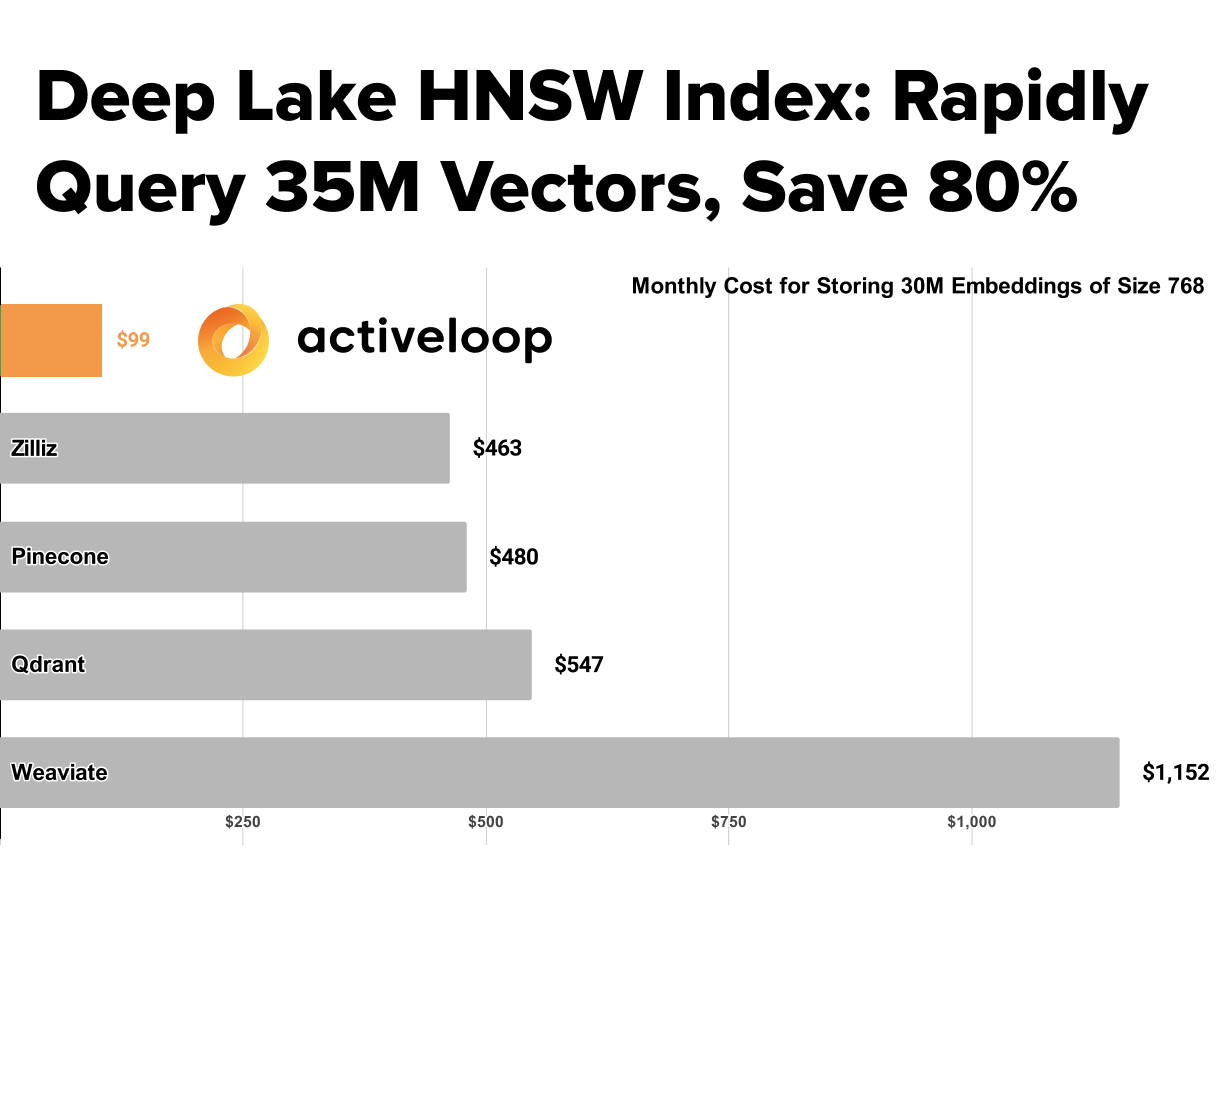 Deep Lake HNSW Index: Rapidly Query 35M Vectors, Save 80%